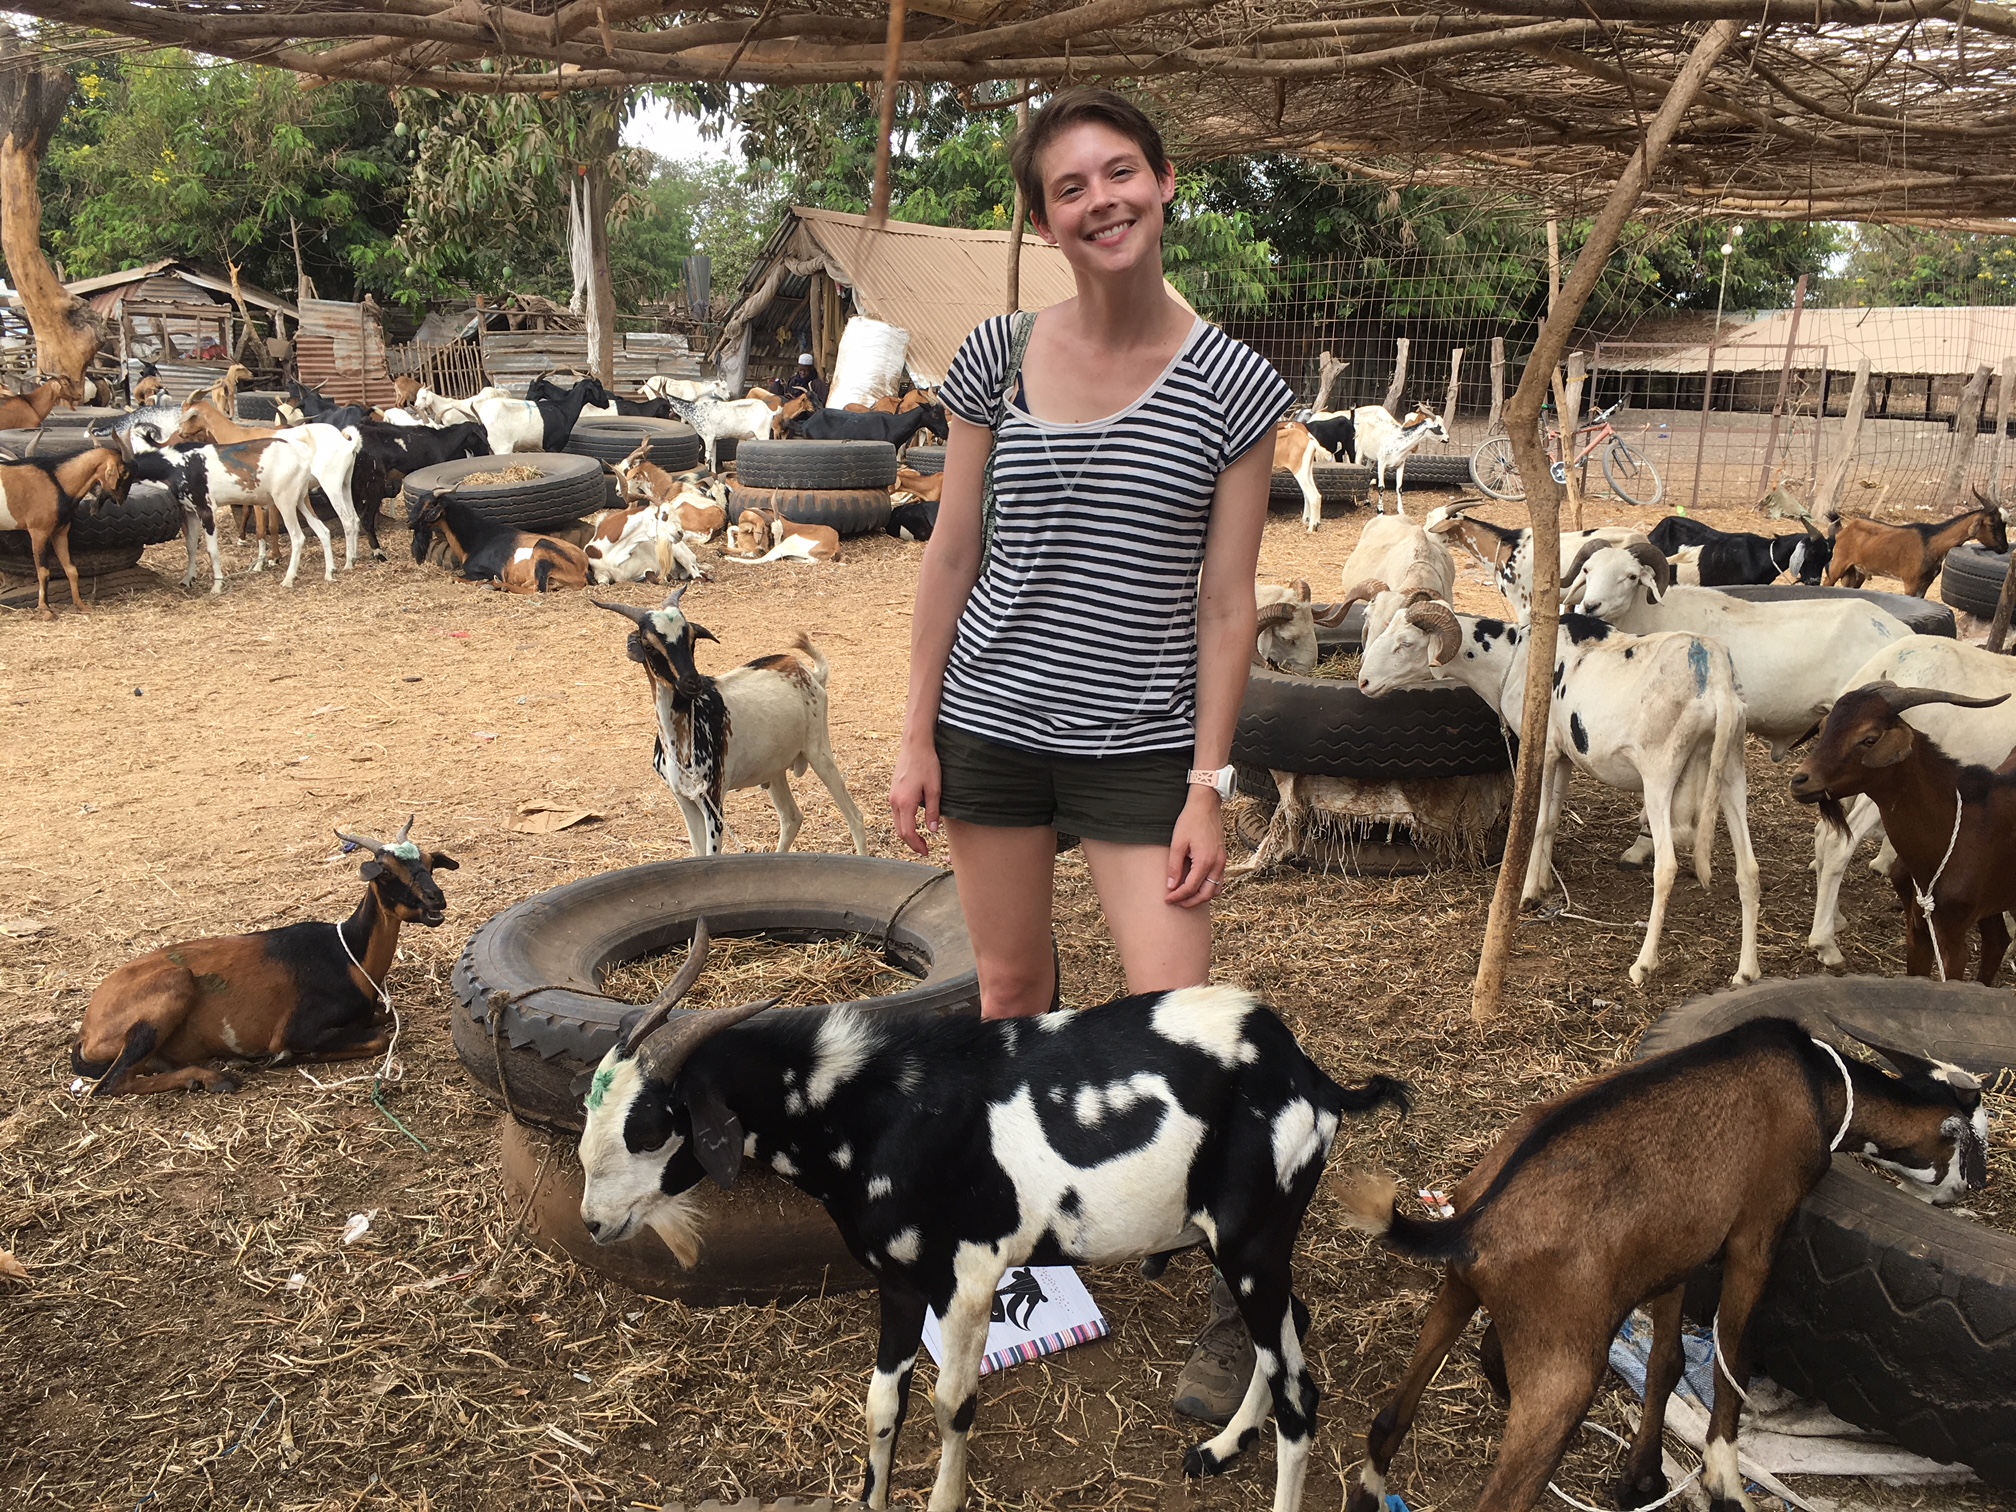 Wilson, Briana with goats